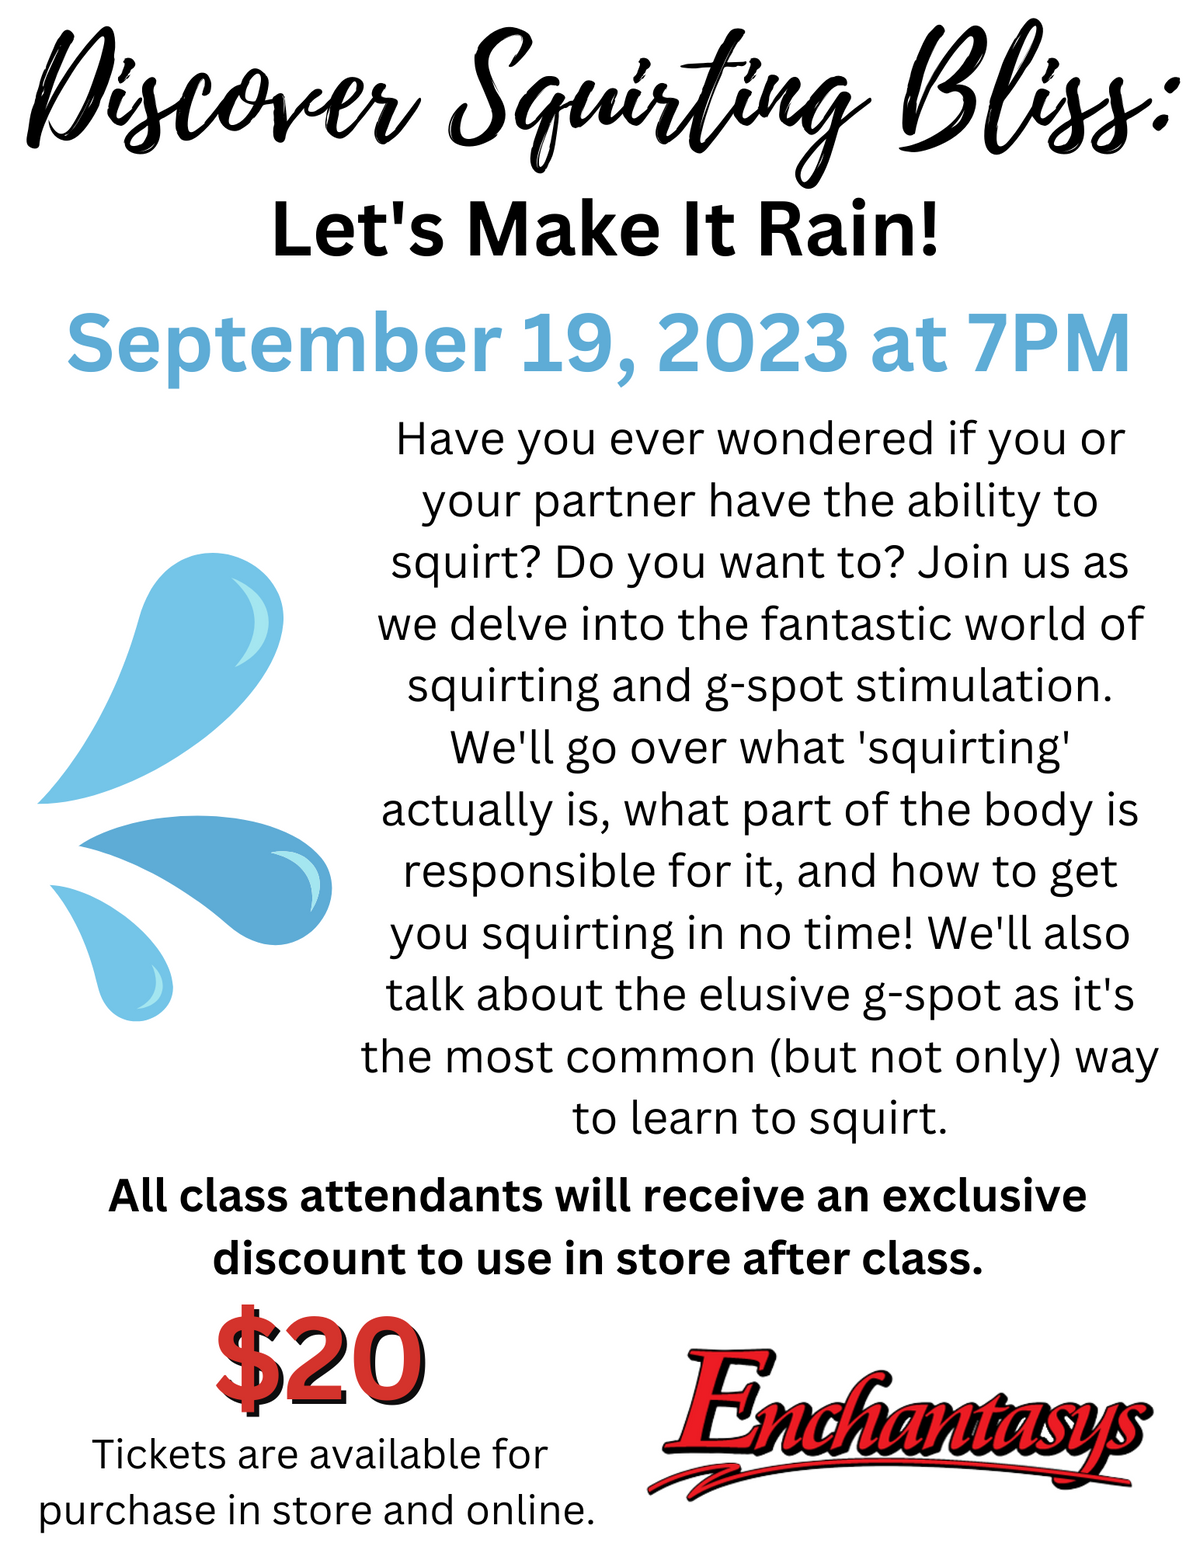 Discover Squirting Bliss: Let's Make It Rain! (Ramsey, MN)